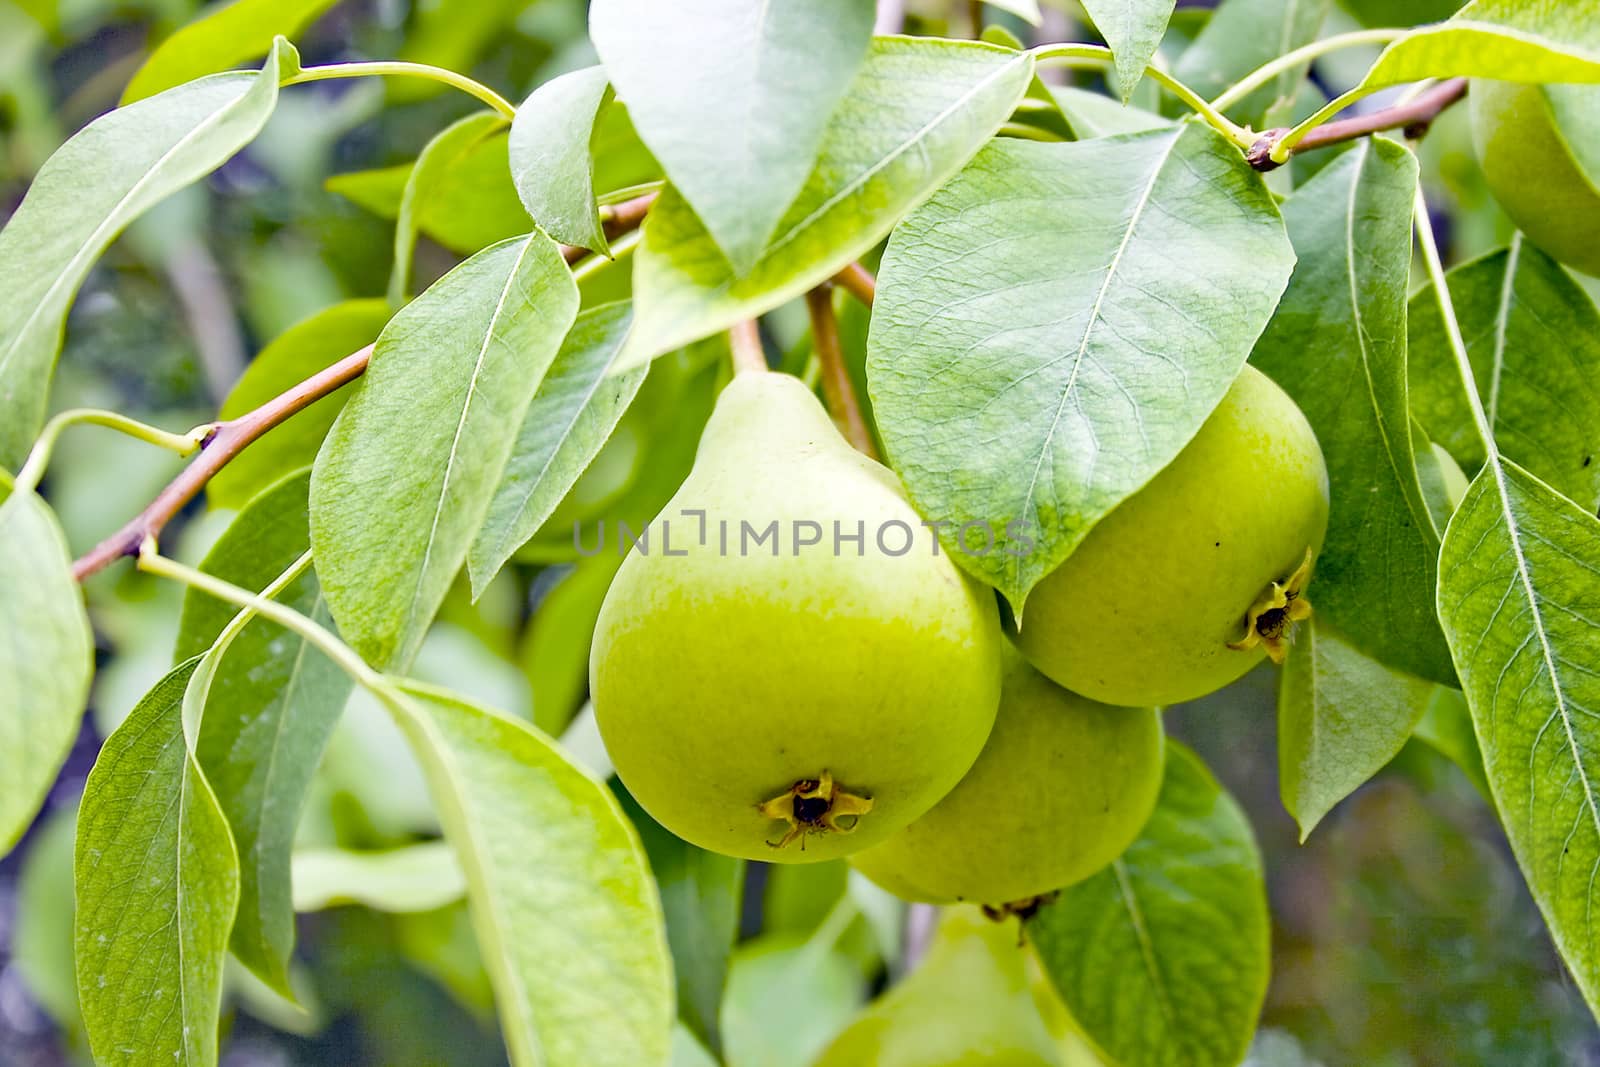 green pears on the tree in the garden